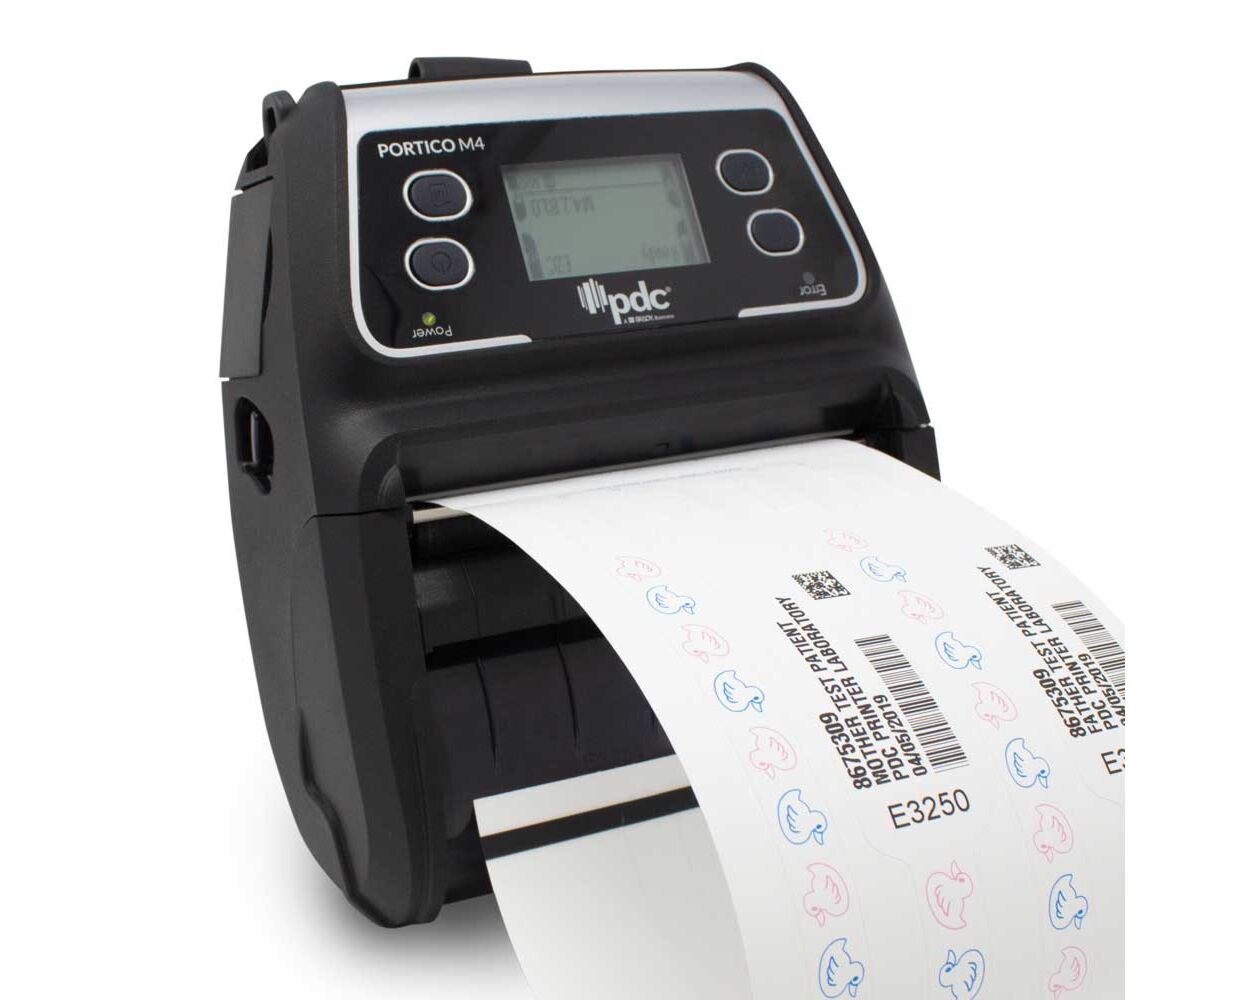 Thermal Label Printers Products, Supplies and Equipment